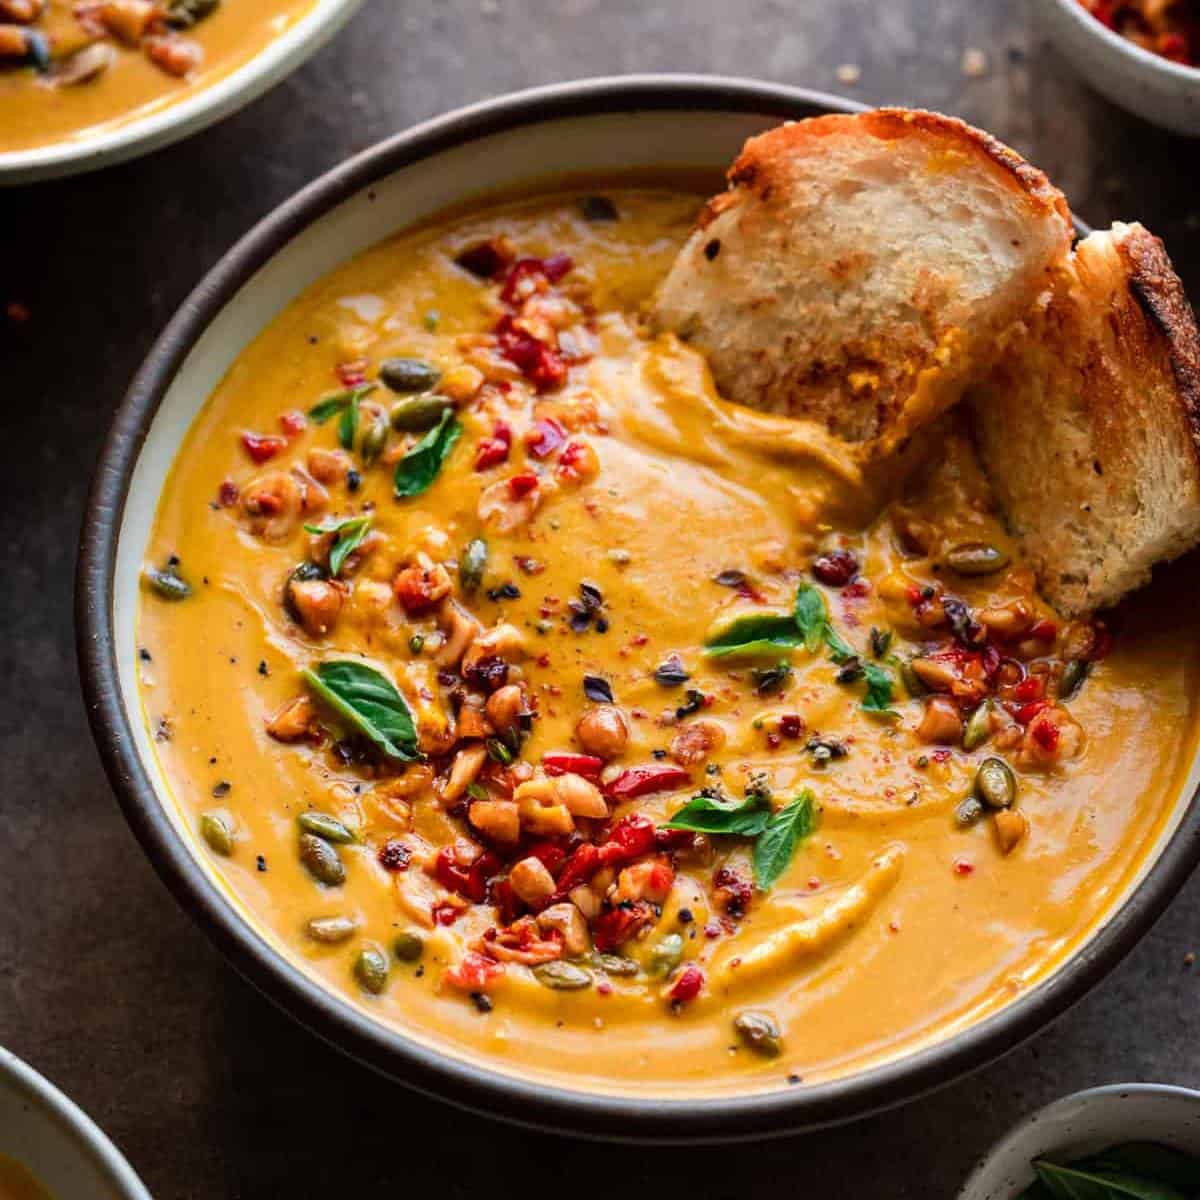 vibrant orange soup with bread and toppings that contrast the orange.